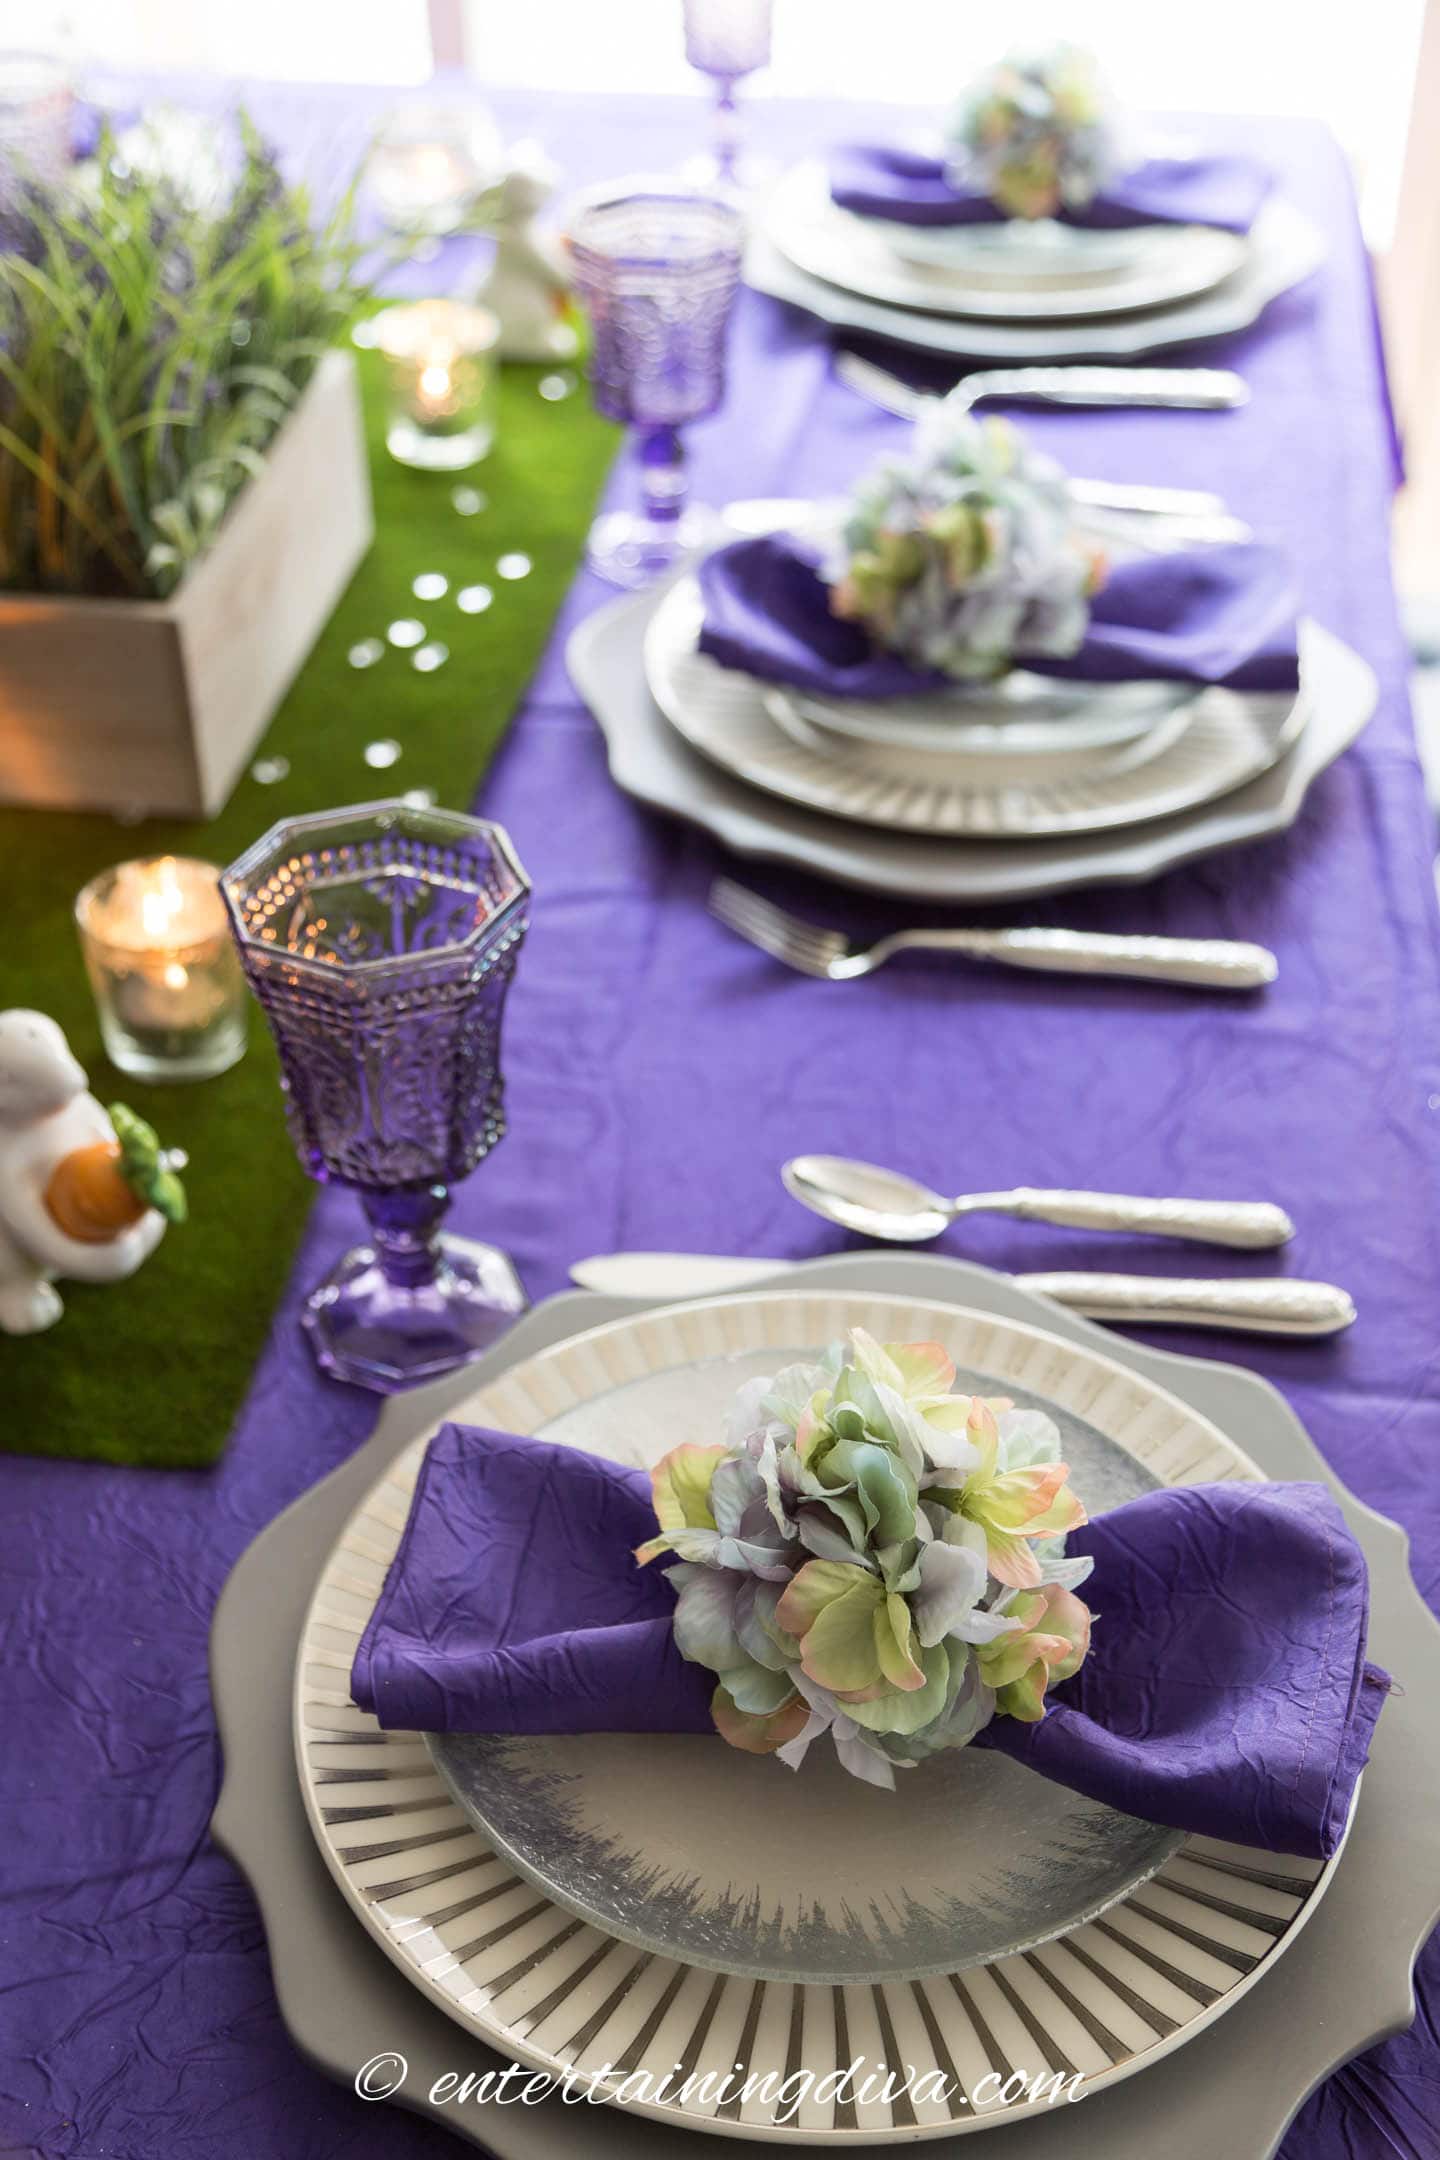 The Easter table setting | How To Create An Easter Tablescape (Inspired by Spring)